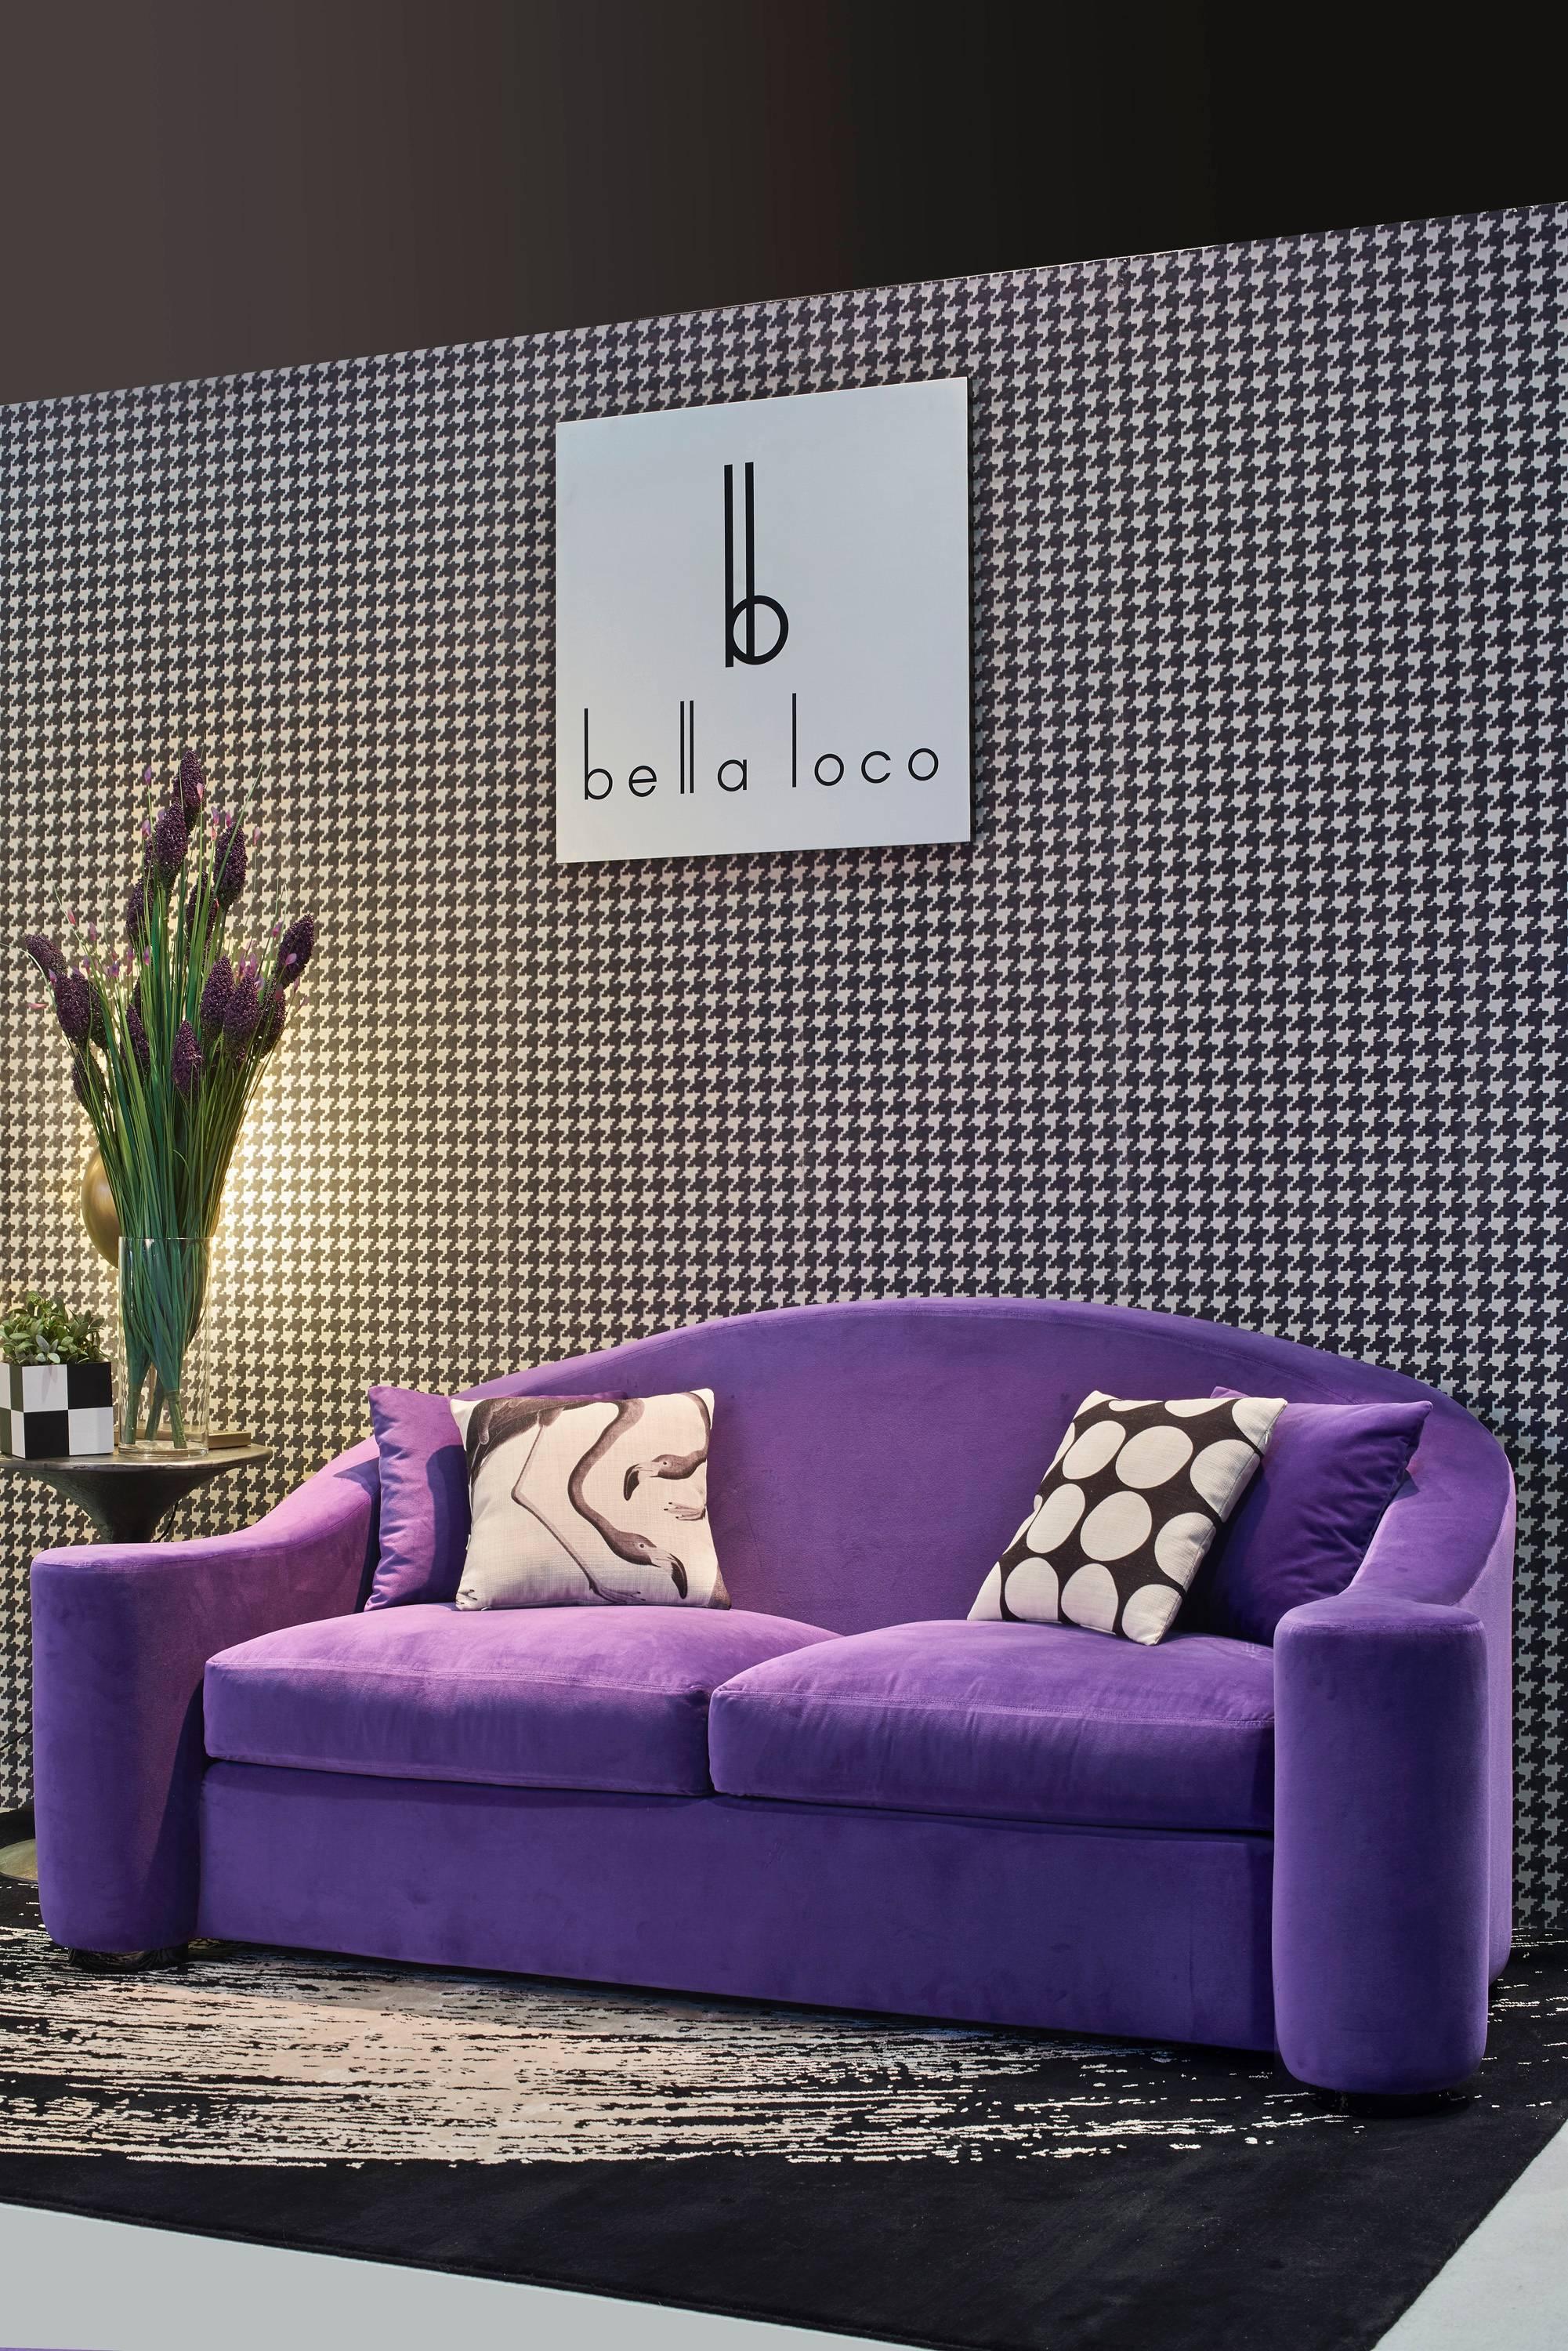 Striking curvilinear Italian lounge with Italian purple velvet and black gloss lacquered feet. Very comfortable. The sofa for sale is available now.

Ask for custom quote in any size or fabric.